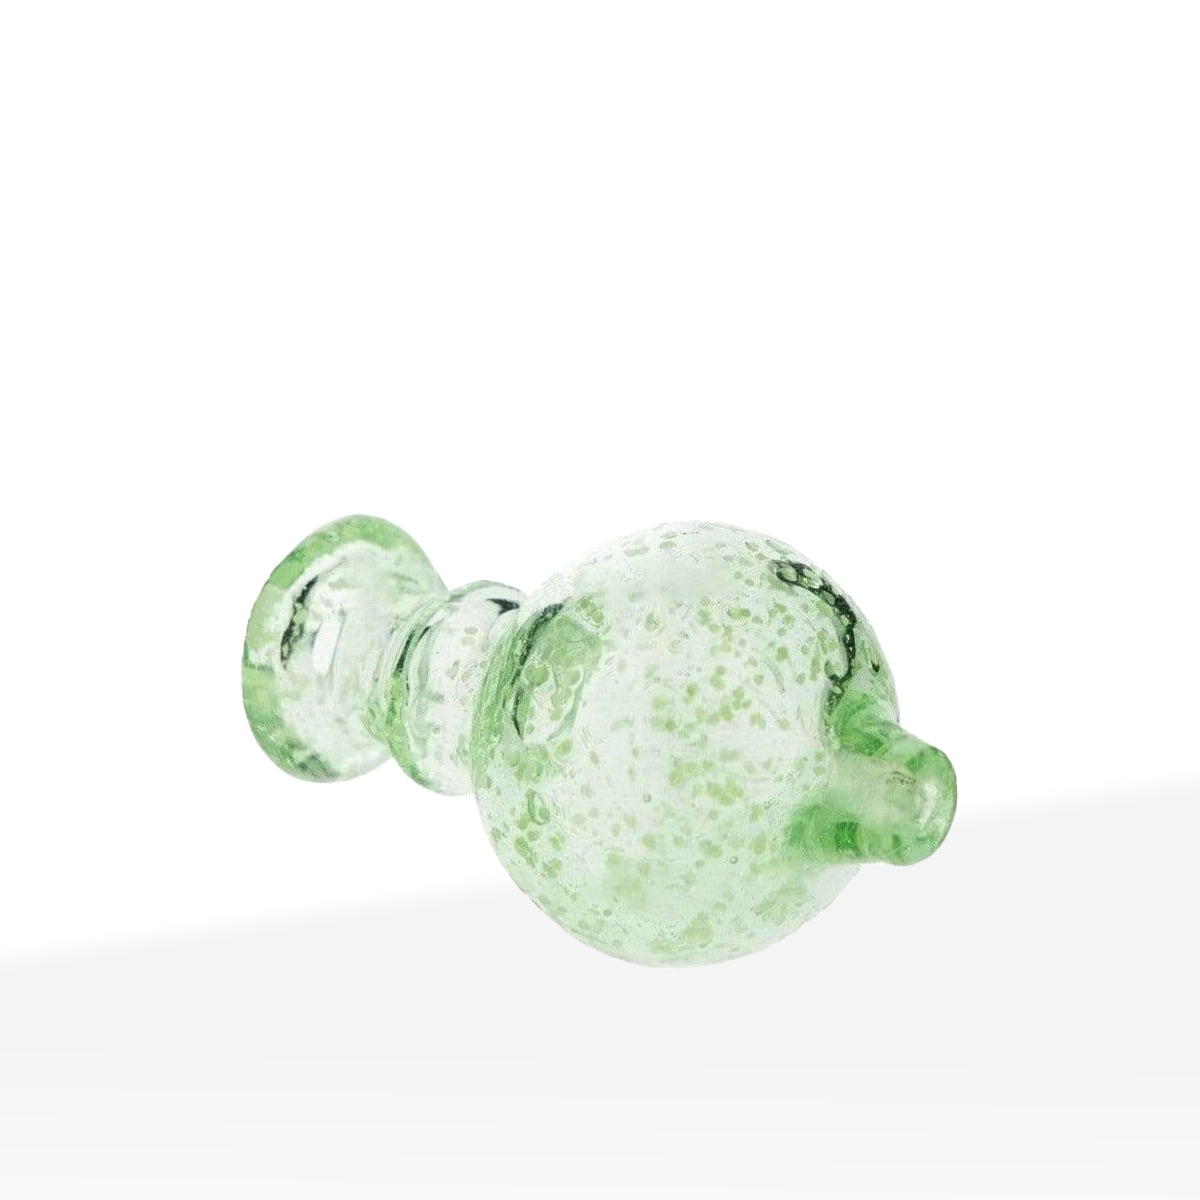 Glow in the Dark Round Carb Cap - Green